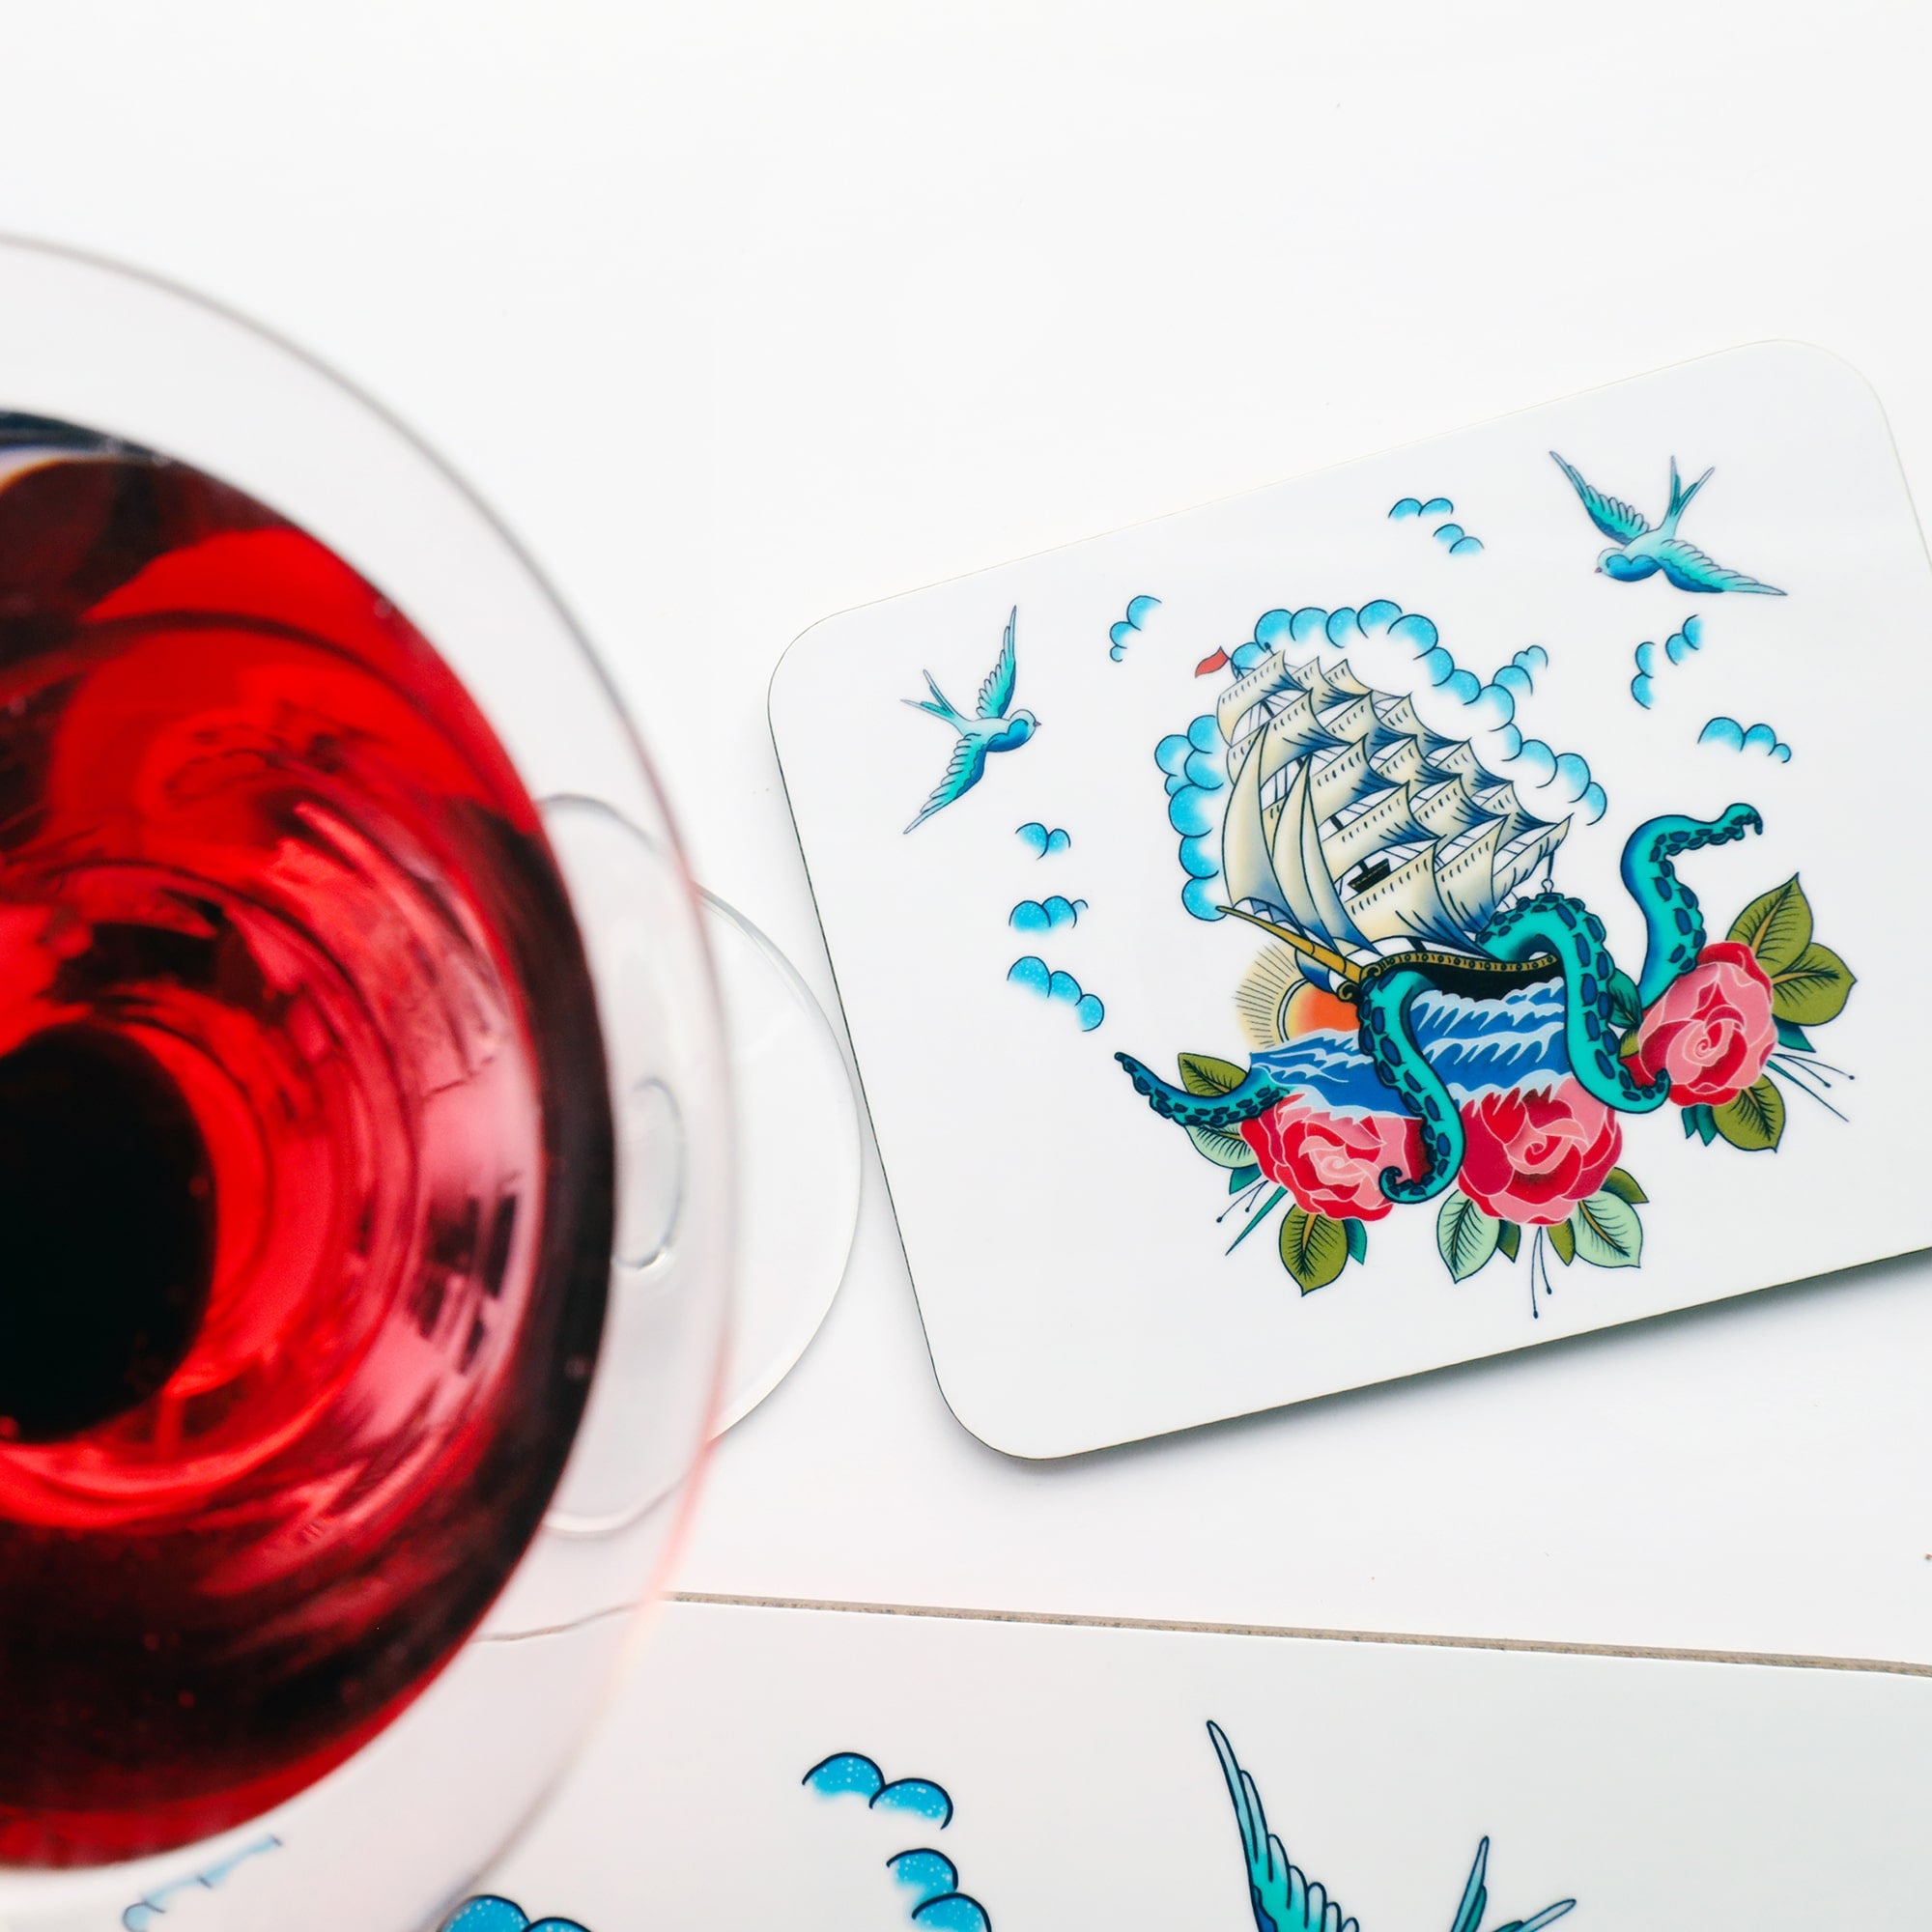 Ship and kraken design coaster inspired by sailors tattoos. This is on a white background with the top of a matching placemat just visible at the bottom and a red cocktail to the left.